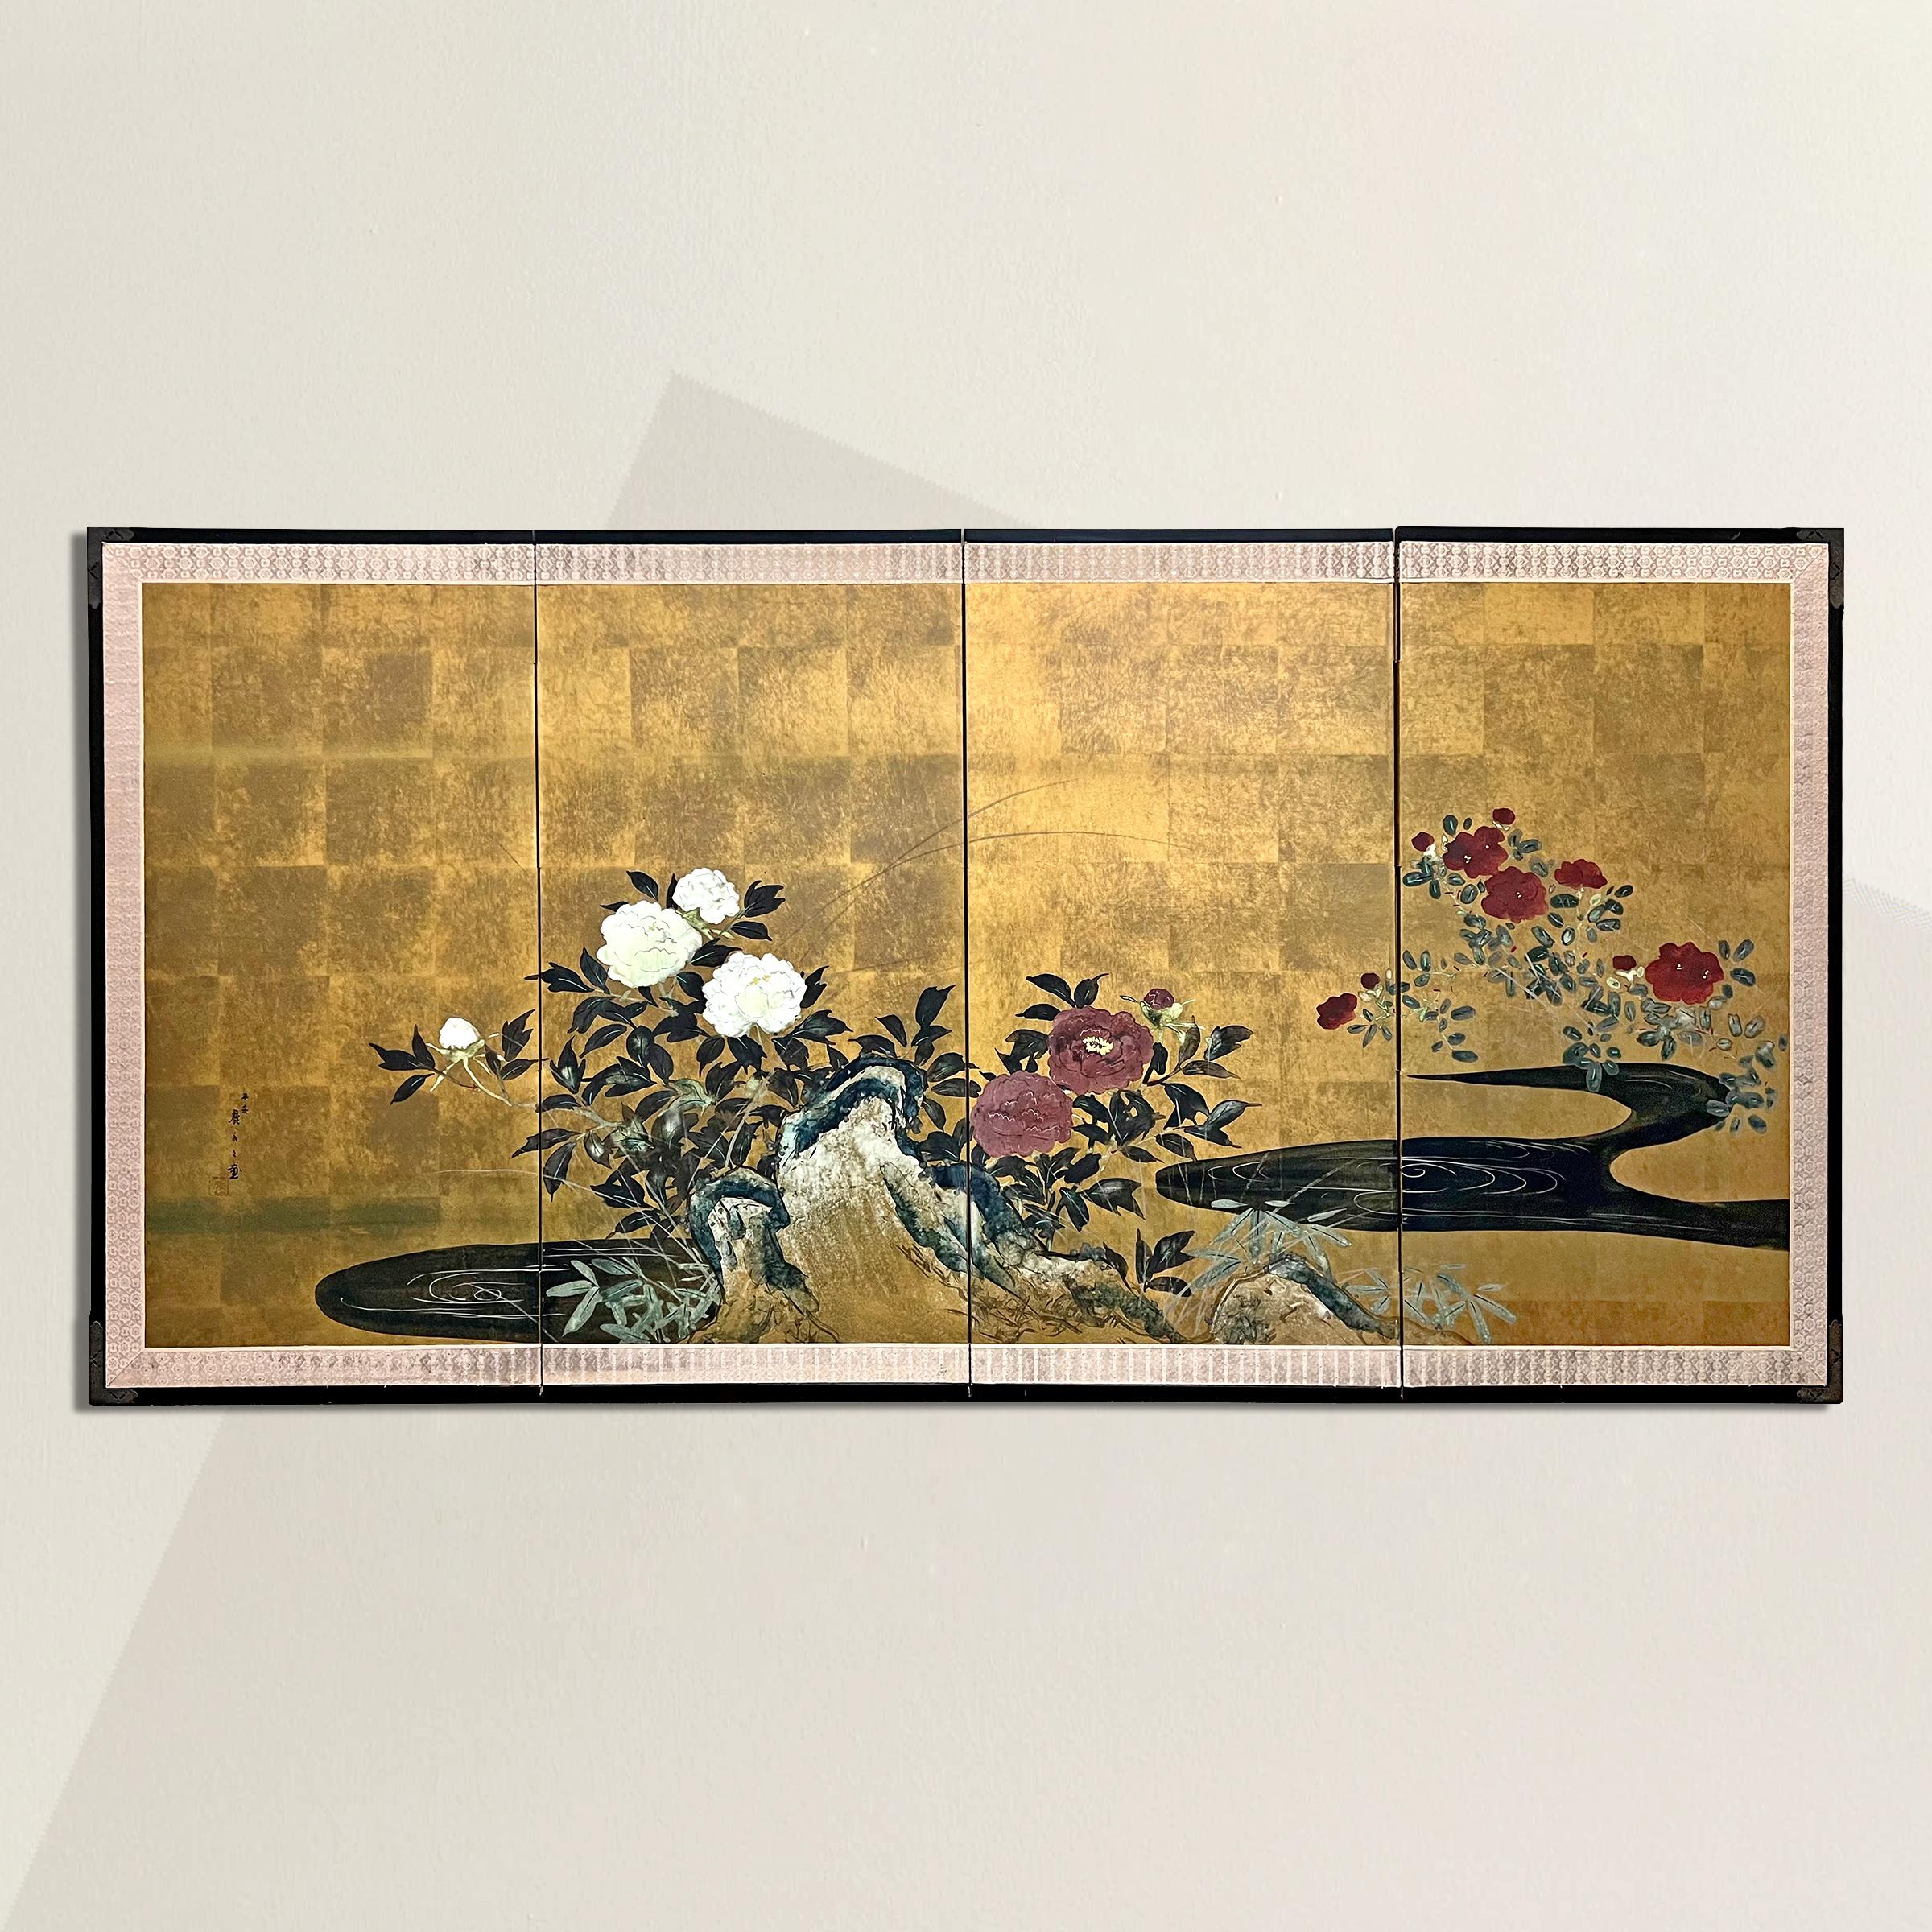 Step into the captivating world of 19th-century Japanese art with this remarkable Edo Period byobu folding screen. Adorned with large hand-painted peonies amidst a garden landscape, this screen is a true testament to the artistic mastery of the Edo